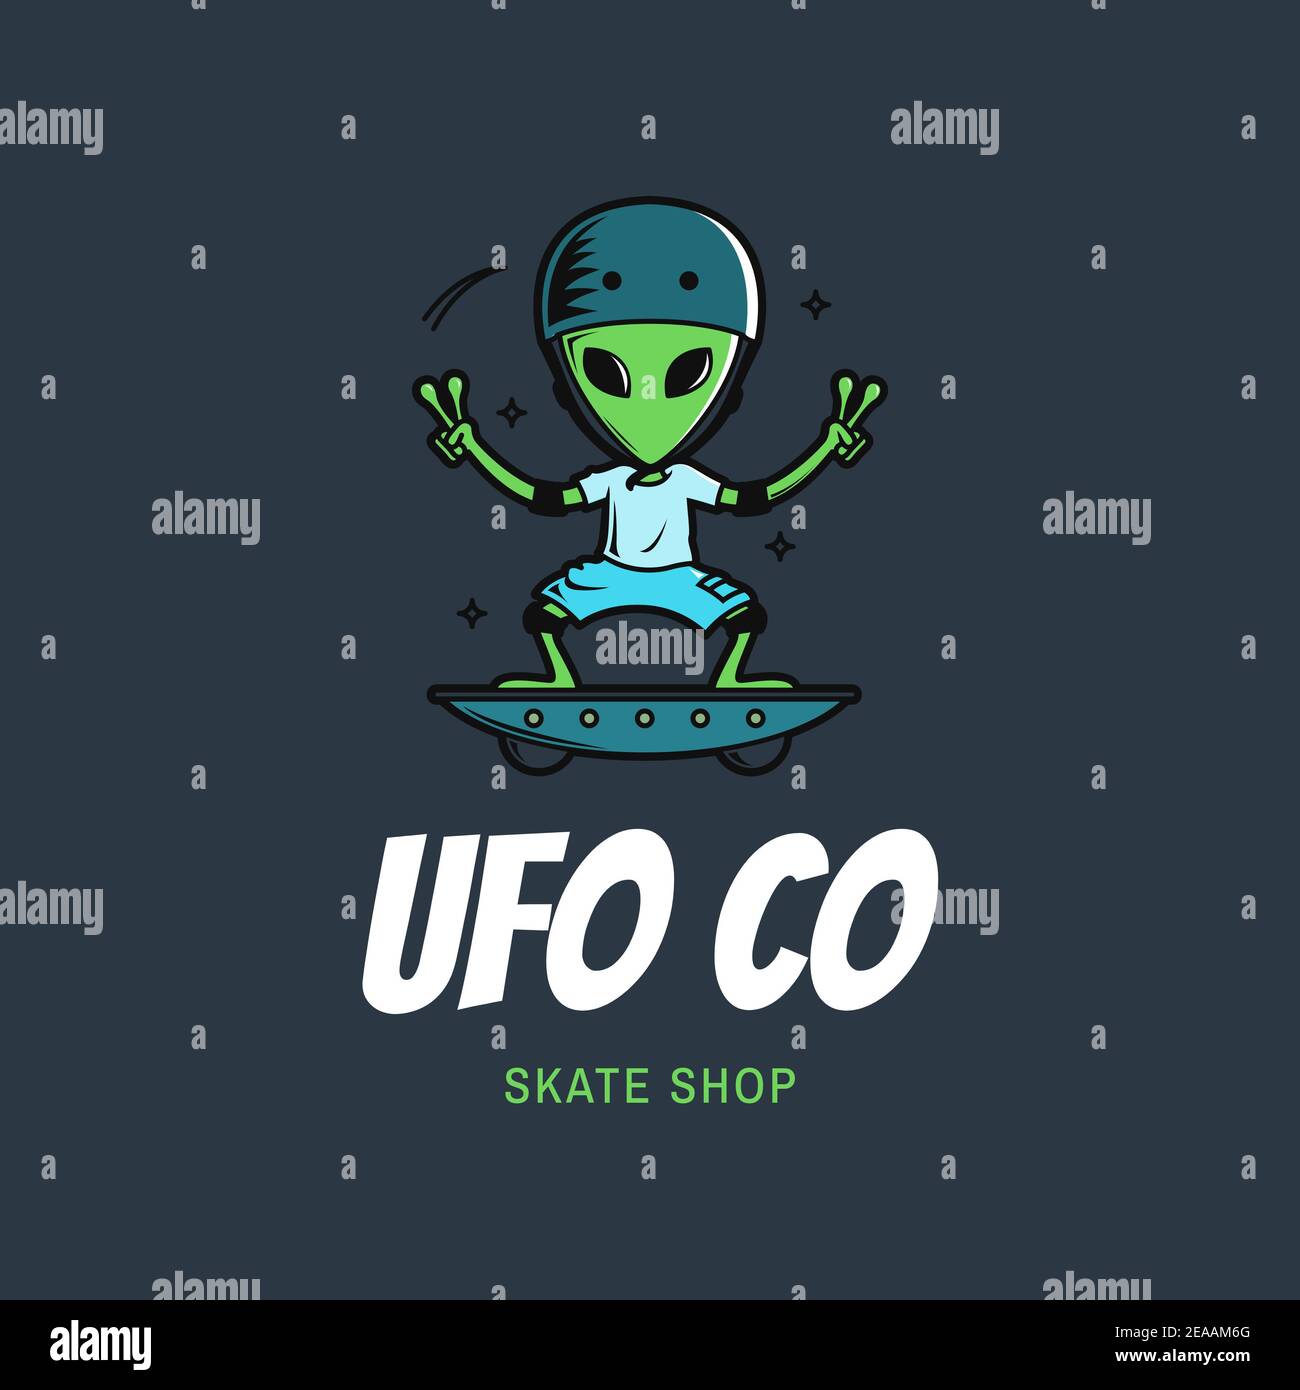 Clothing Brand Logo Featuring An Alien Skater Stock Photo - Alamy